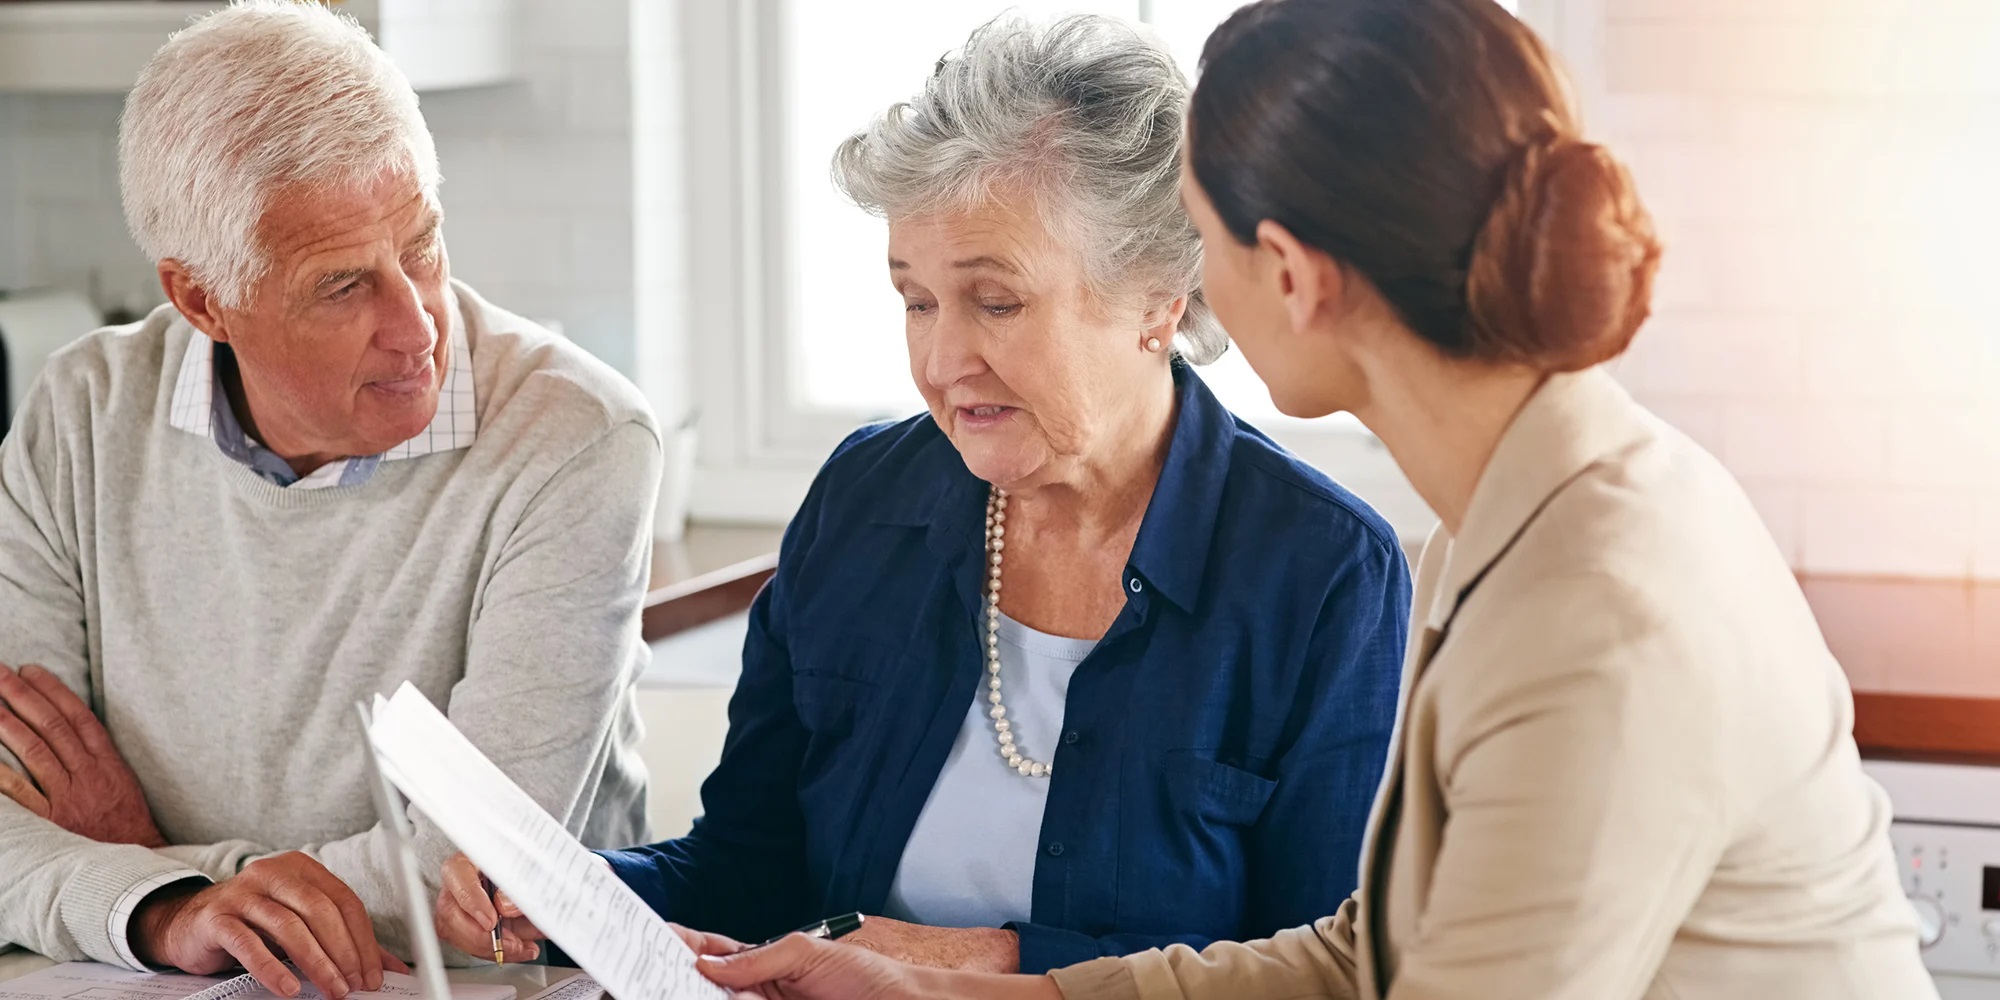 Legal and Financial Considerations for Family Caregivers